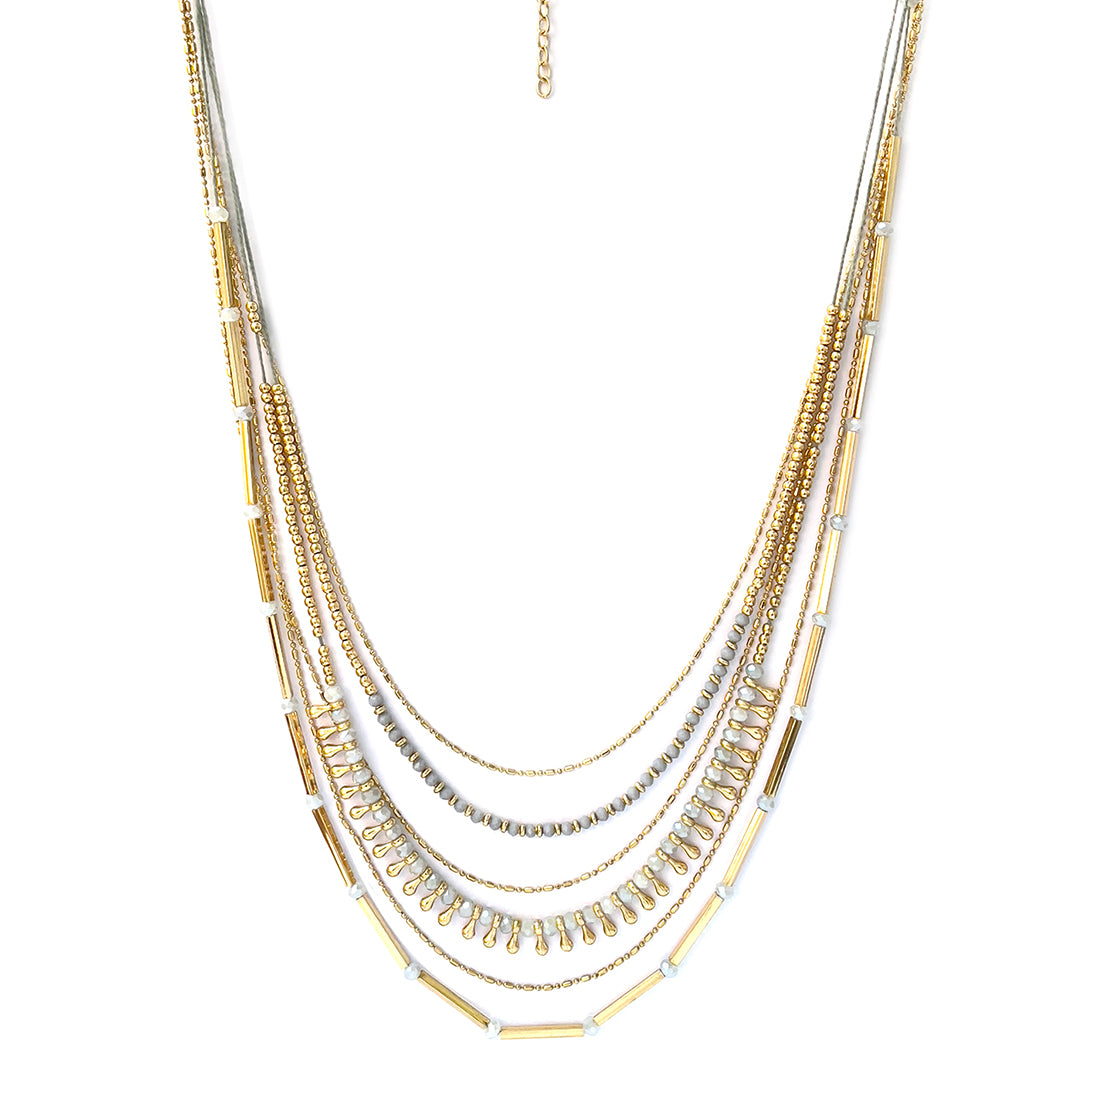 Gold and Grey Multilayered Dainty Chains Boho Party Necklace for Women